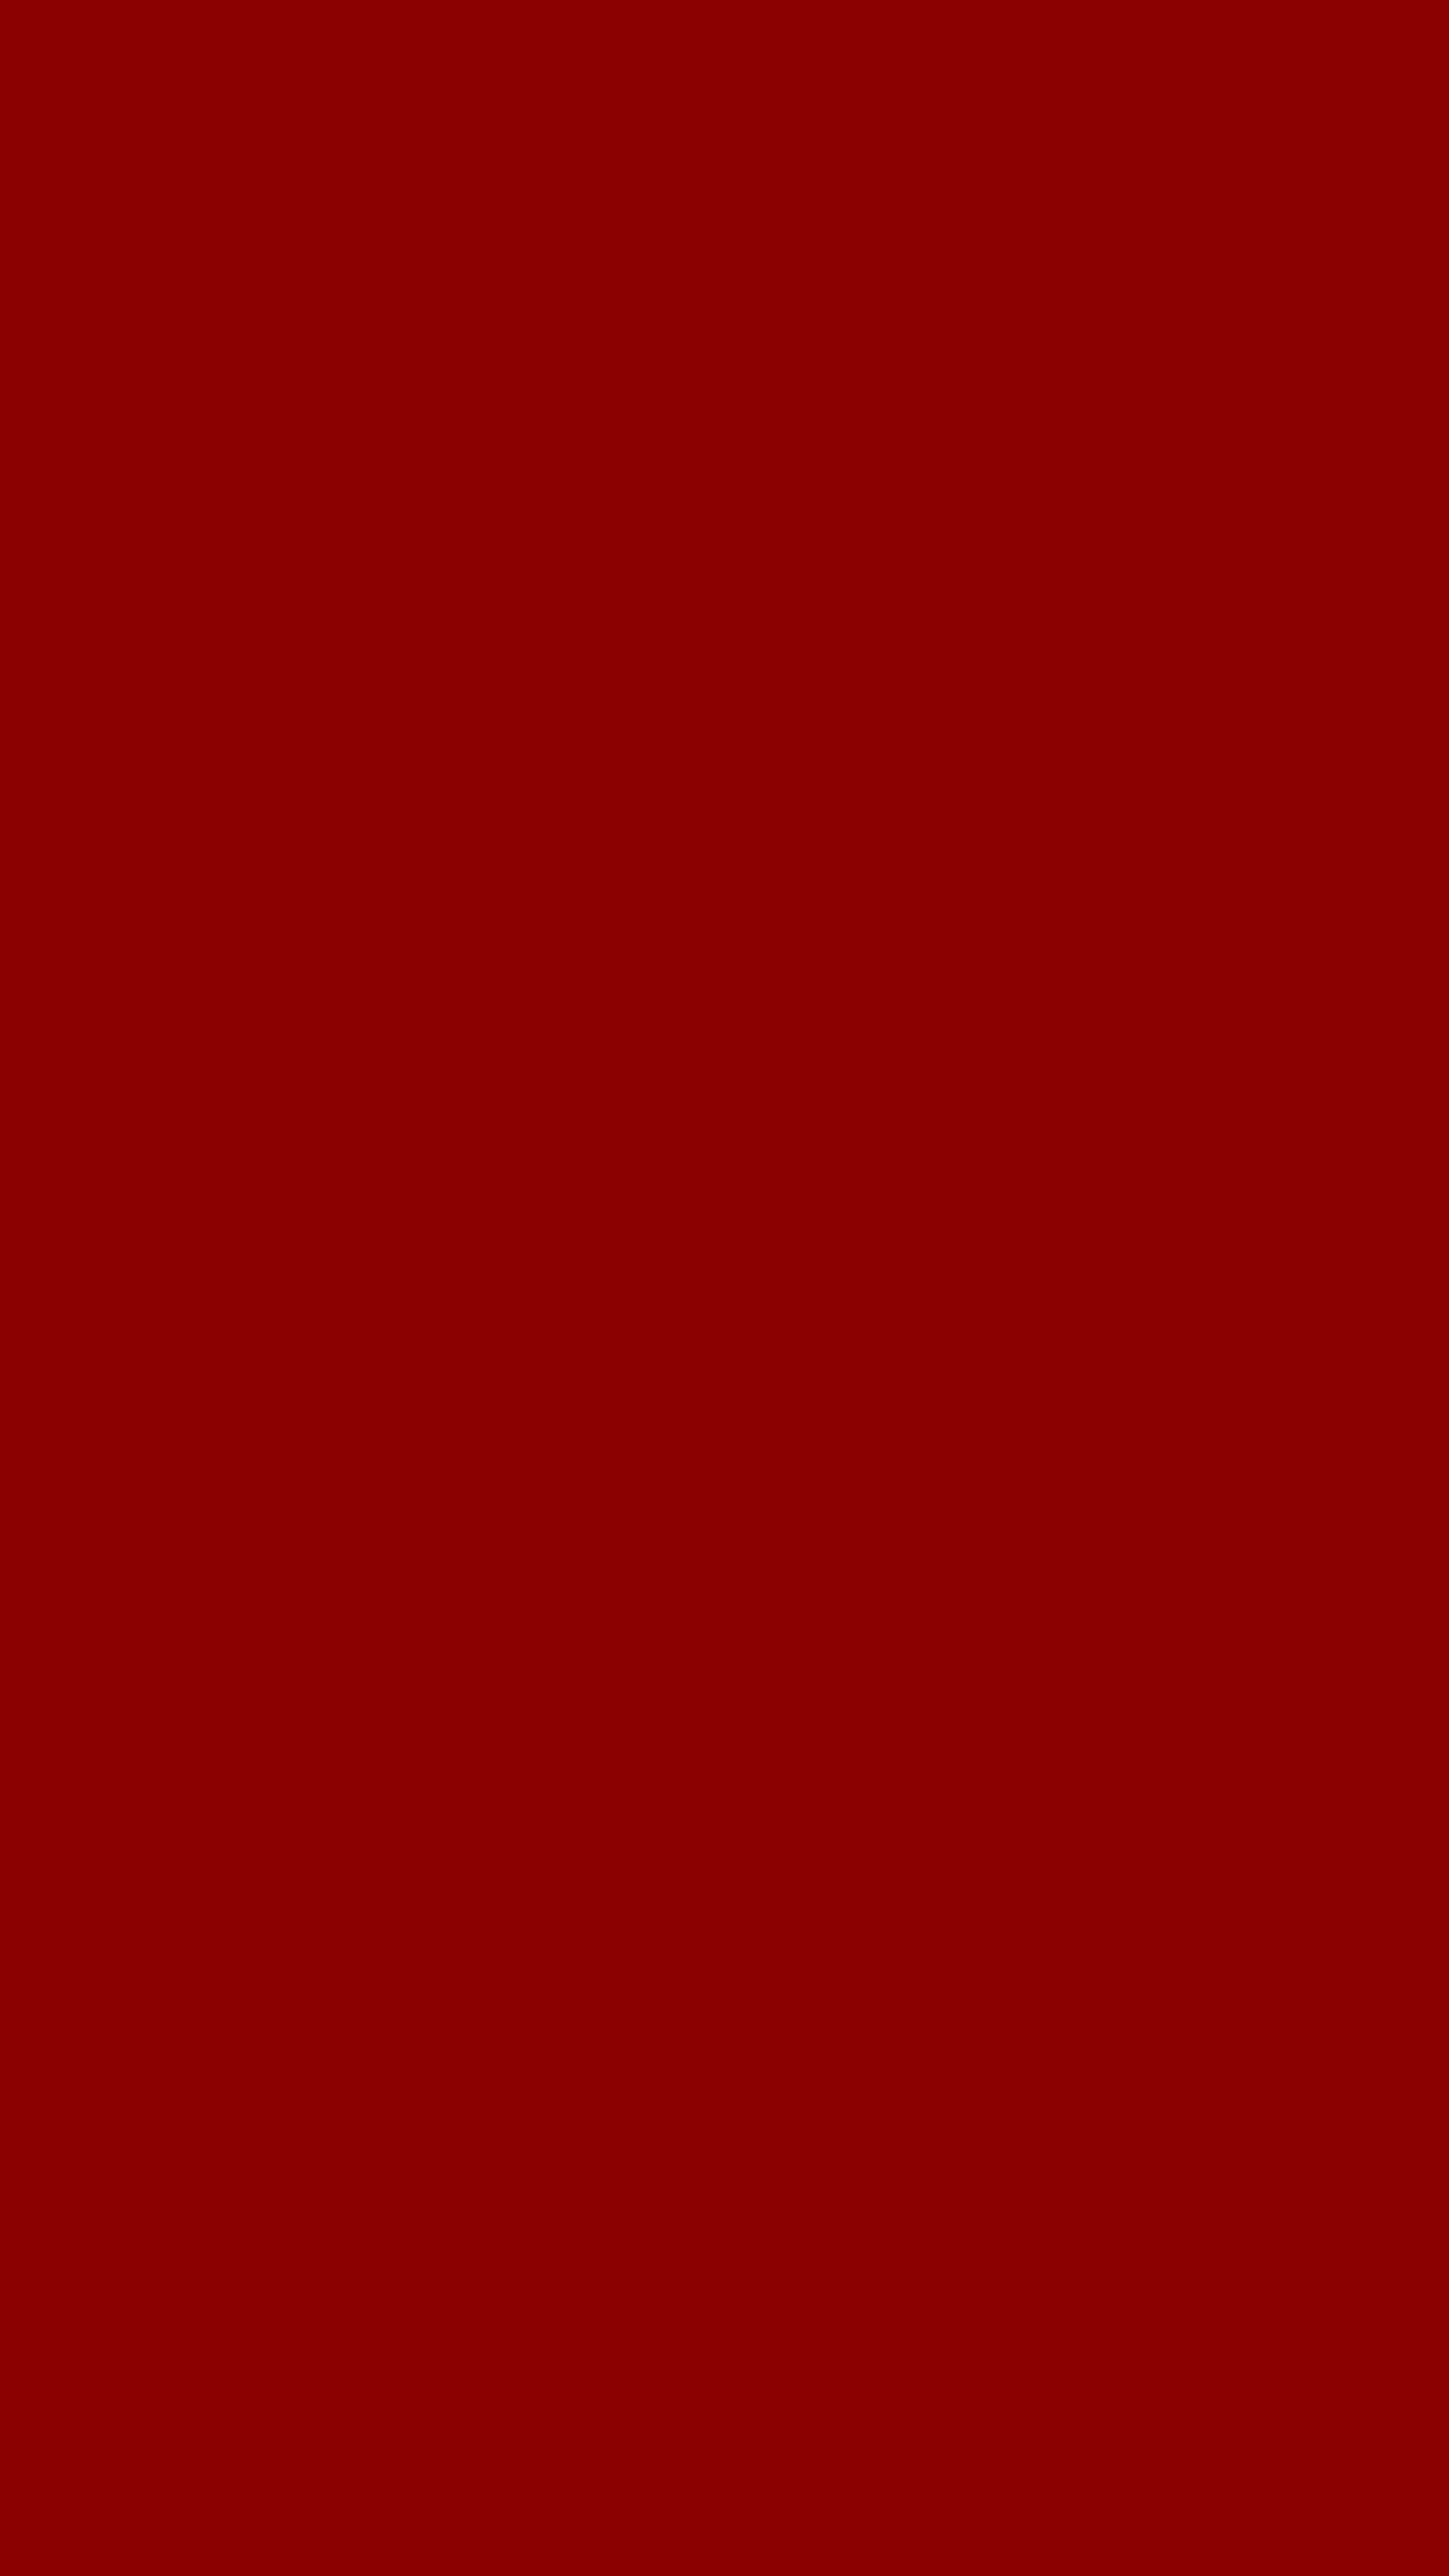 Dark Red Solid Color Background Wallpaper for Mobile Phone